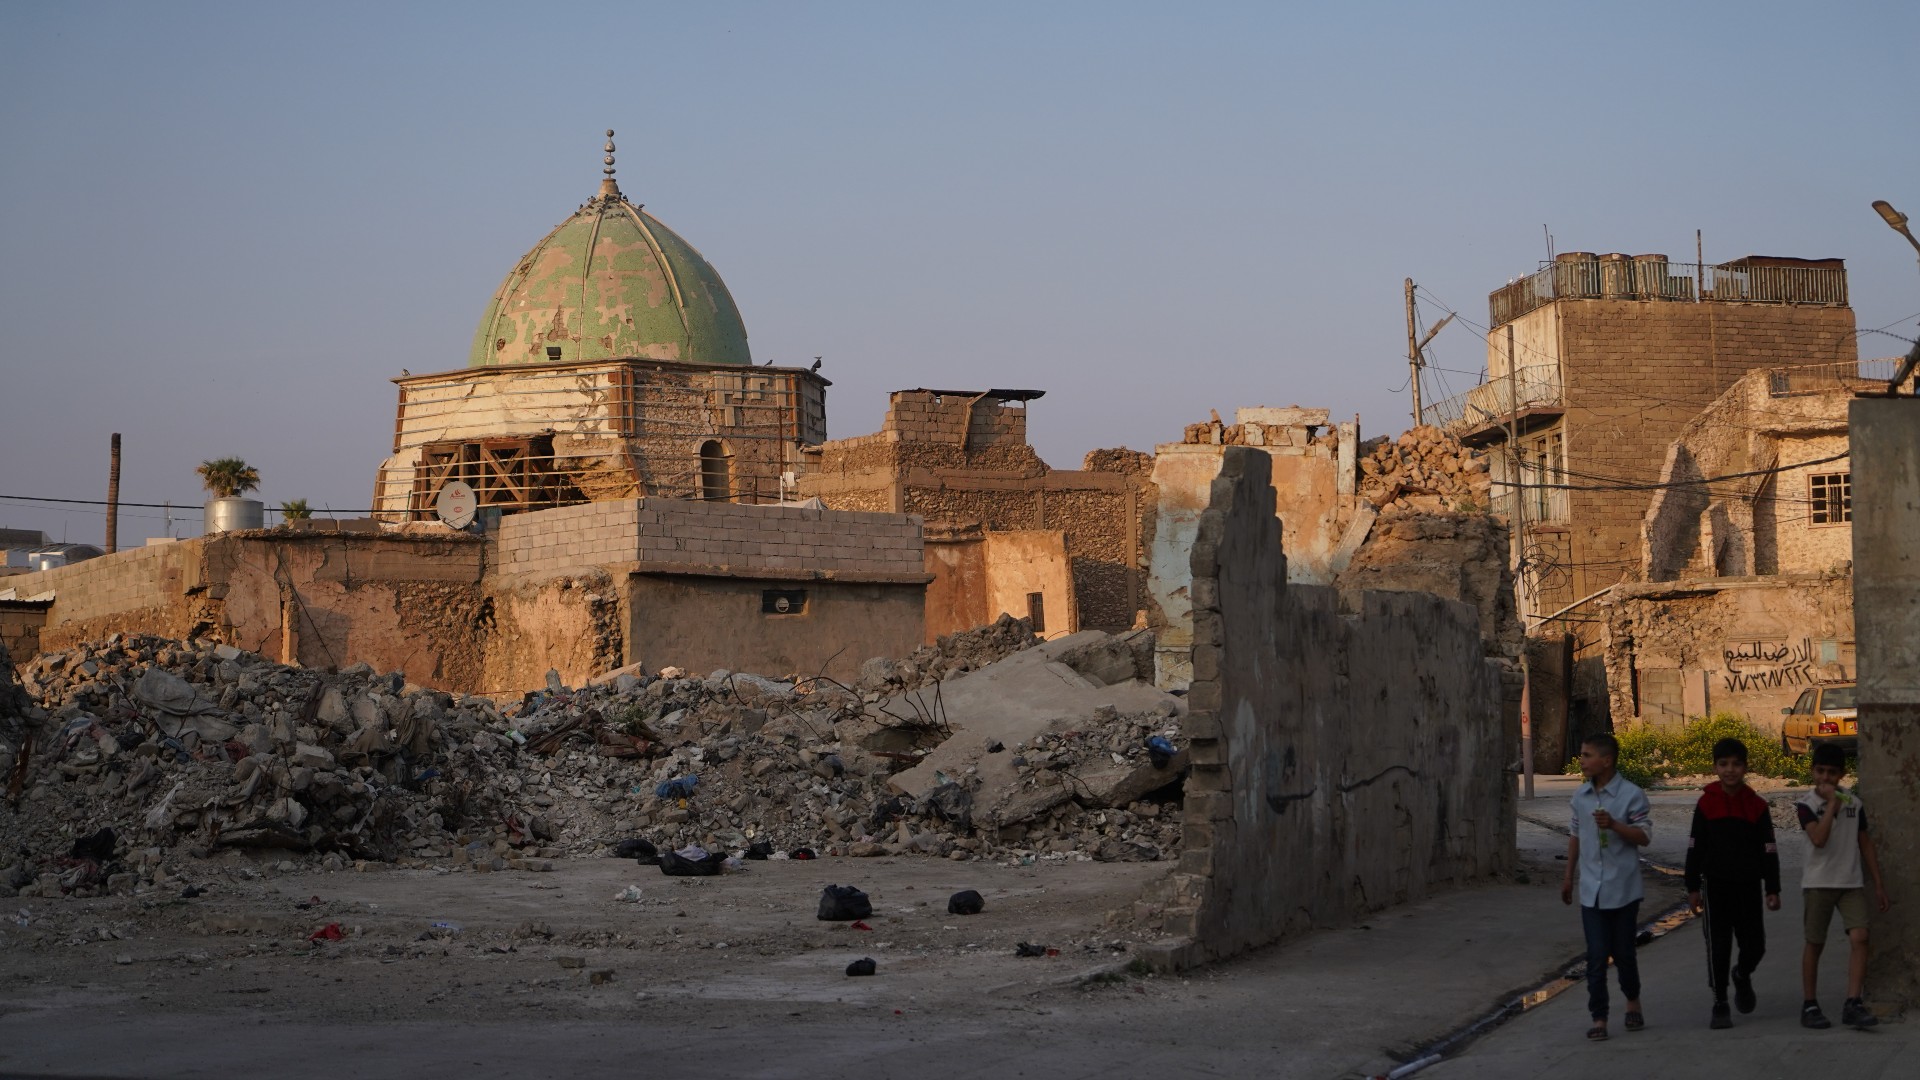 A picture taken on 20 March 2023 shows a view of the dome of the destroyed Al-Nuri Mosque in the Old City of Mosul in northern Iraq (MEE/Ismael Adnan)